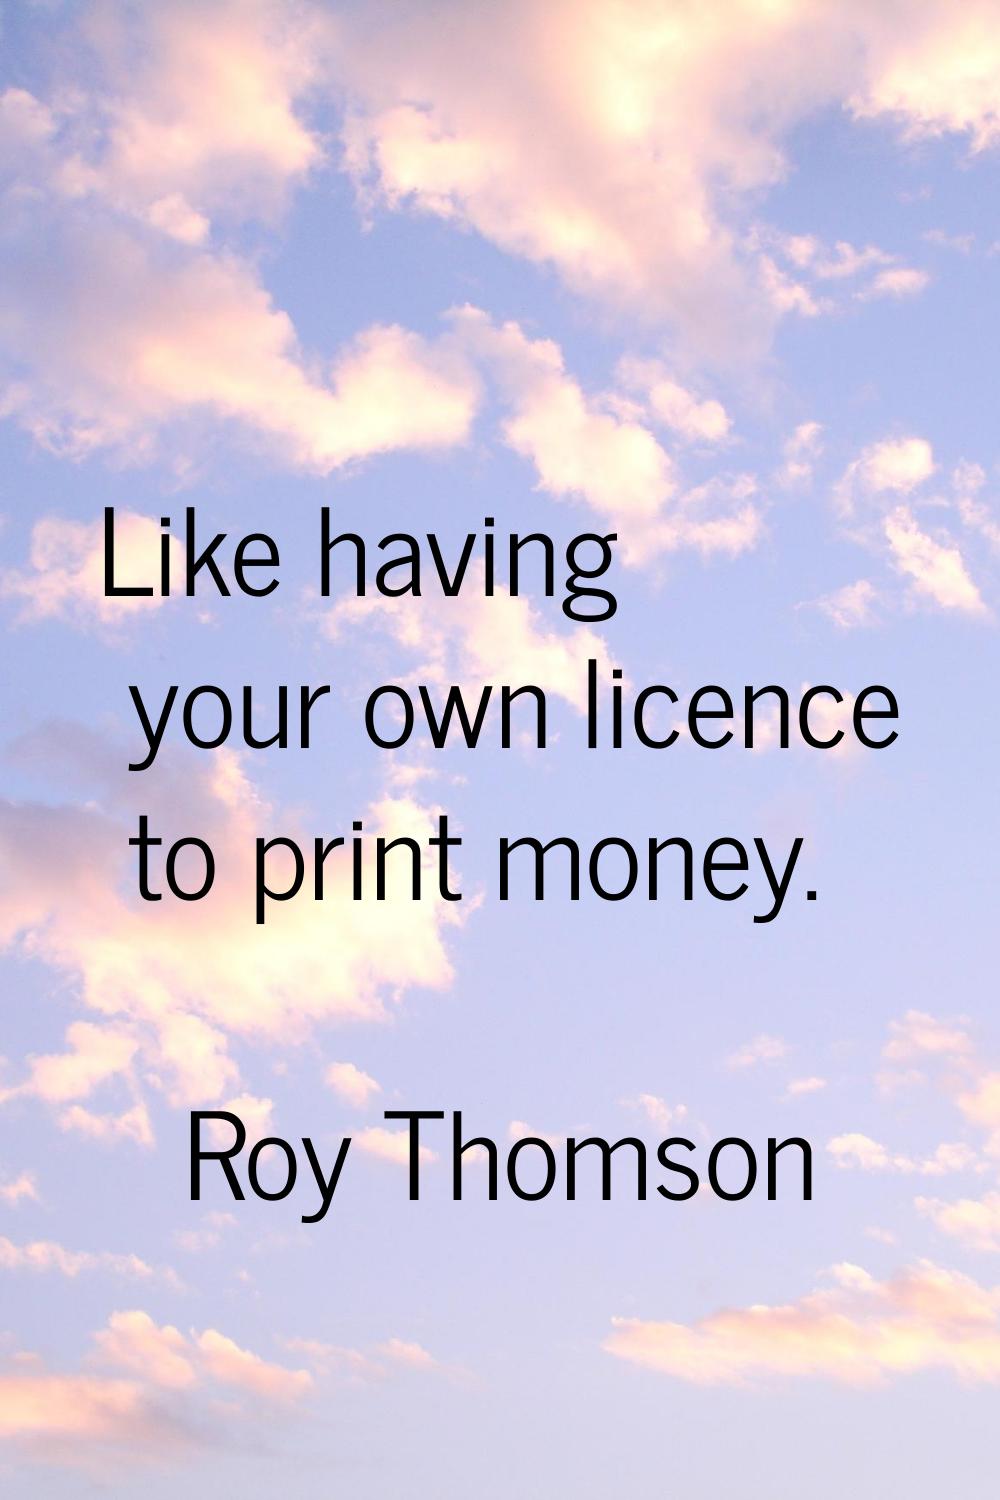 Like having your own licence to print money.